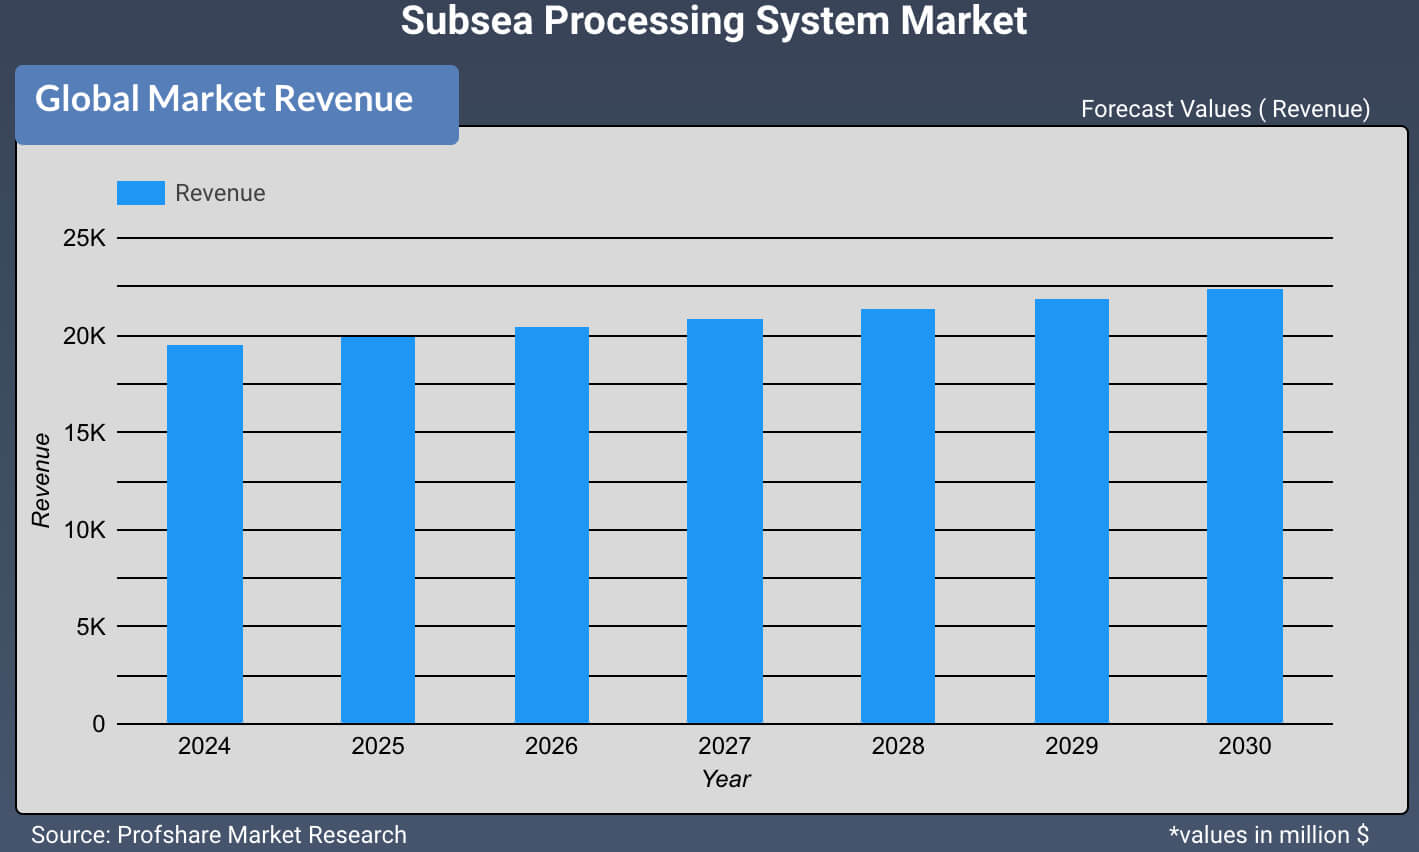 Subsea Processing System Market